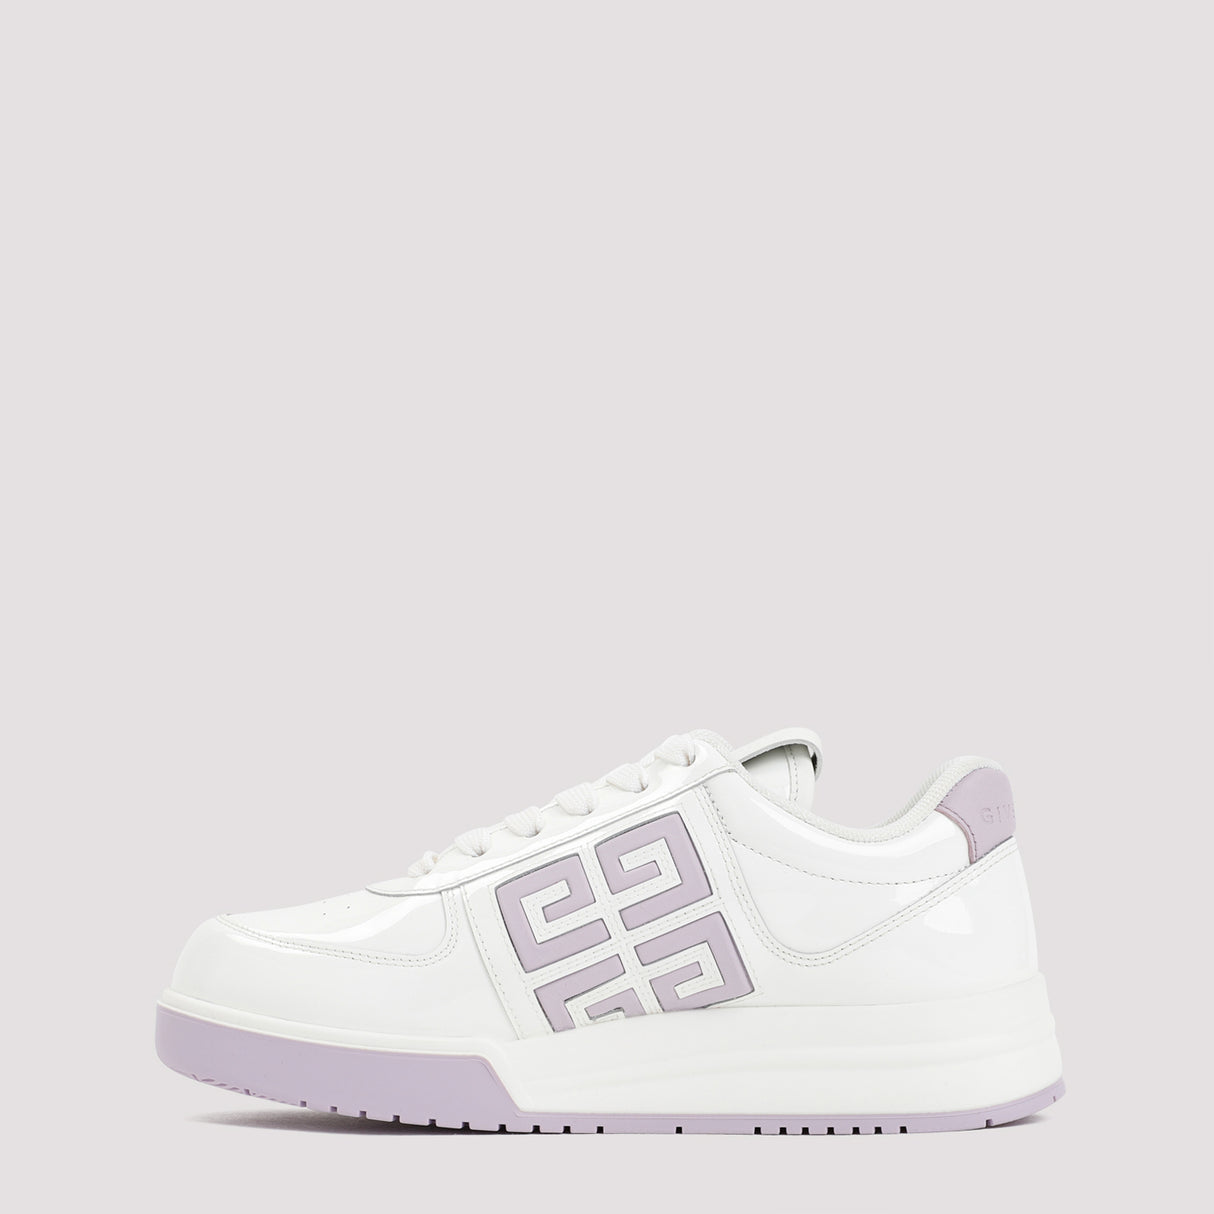 White Leather Sneakers for Women with Contrasting Heel Insert